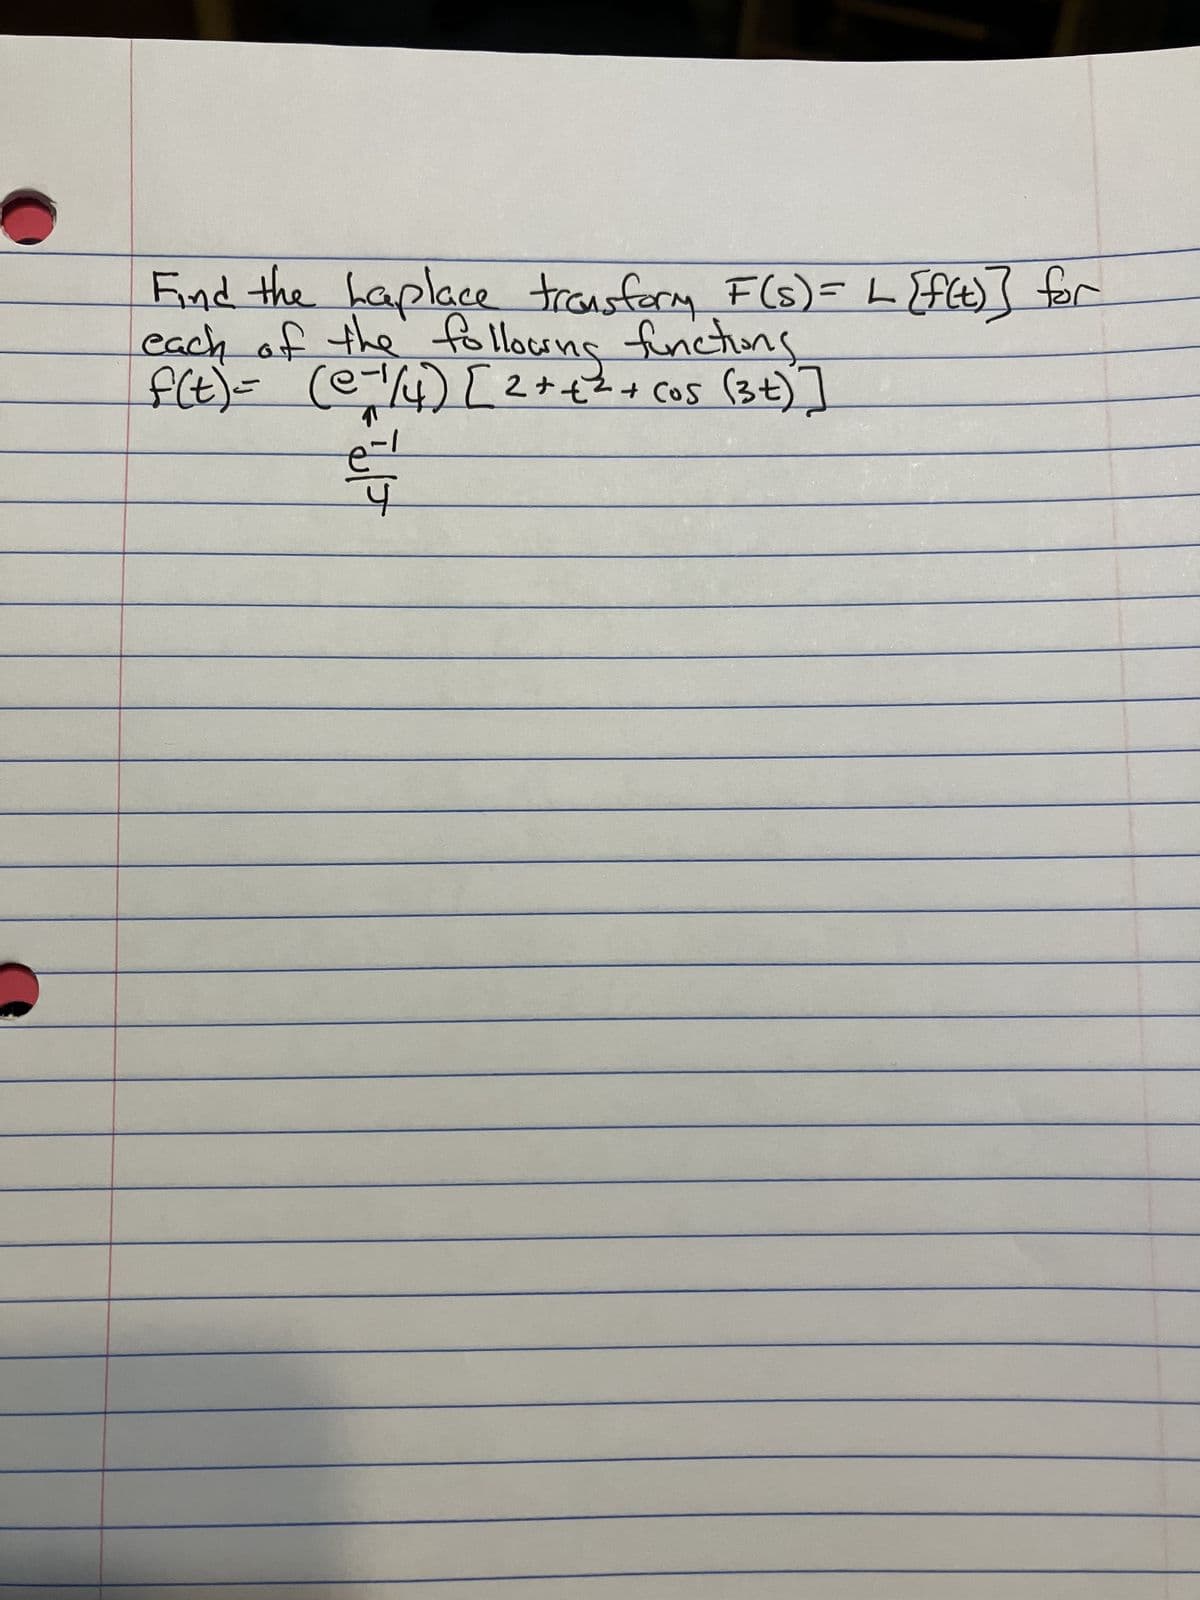 Find the Laplace transform F(S)= L [f(t)] for
each of the following functions
f(t) = (@=1/4) [2+ + ² + (05 (3+)]
TUFF